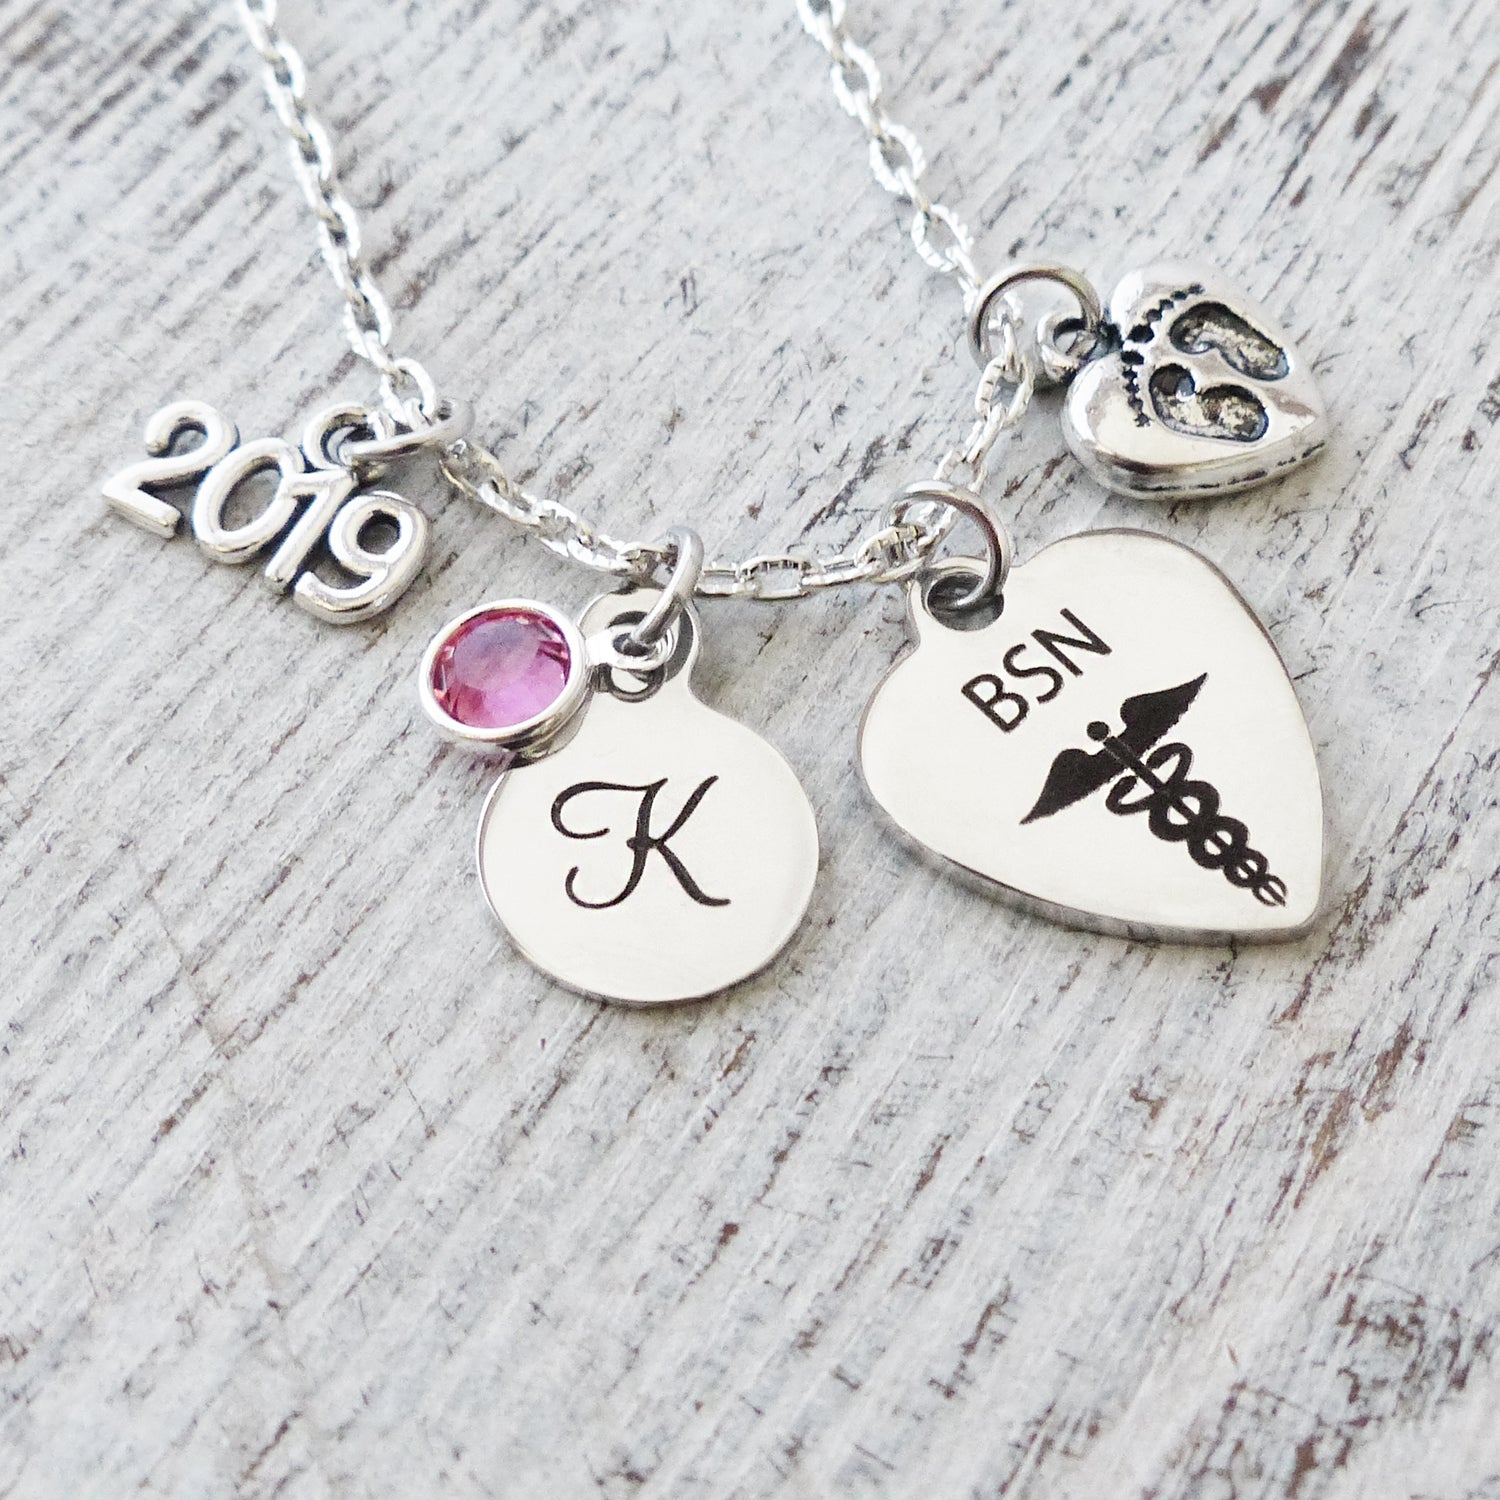 Nursing Graduation Gift for Her, BSN Footprint Necklace, Personalized Graduate Necklace, College BSN Nursing Gifts